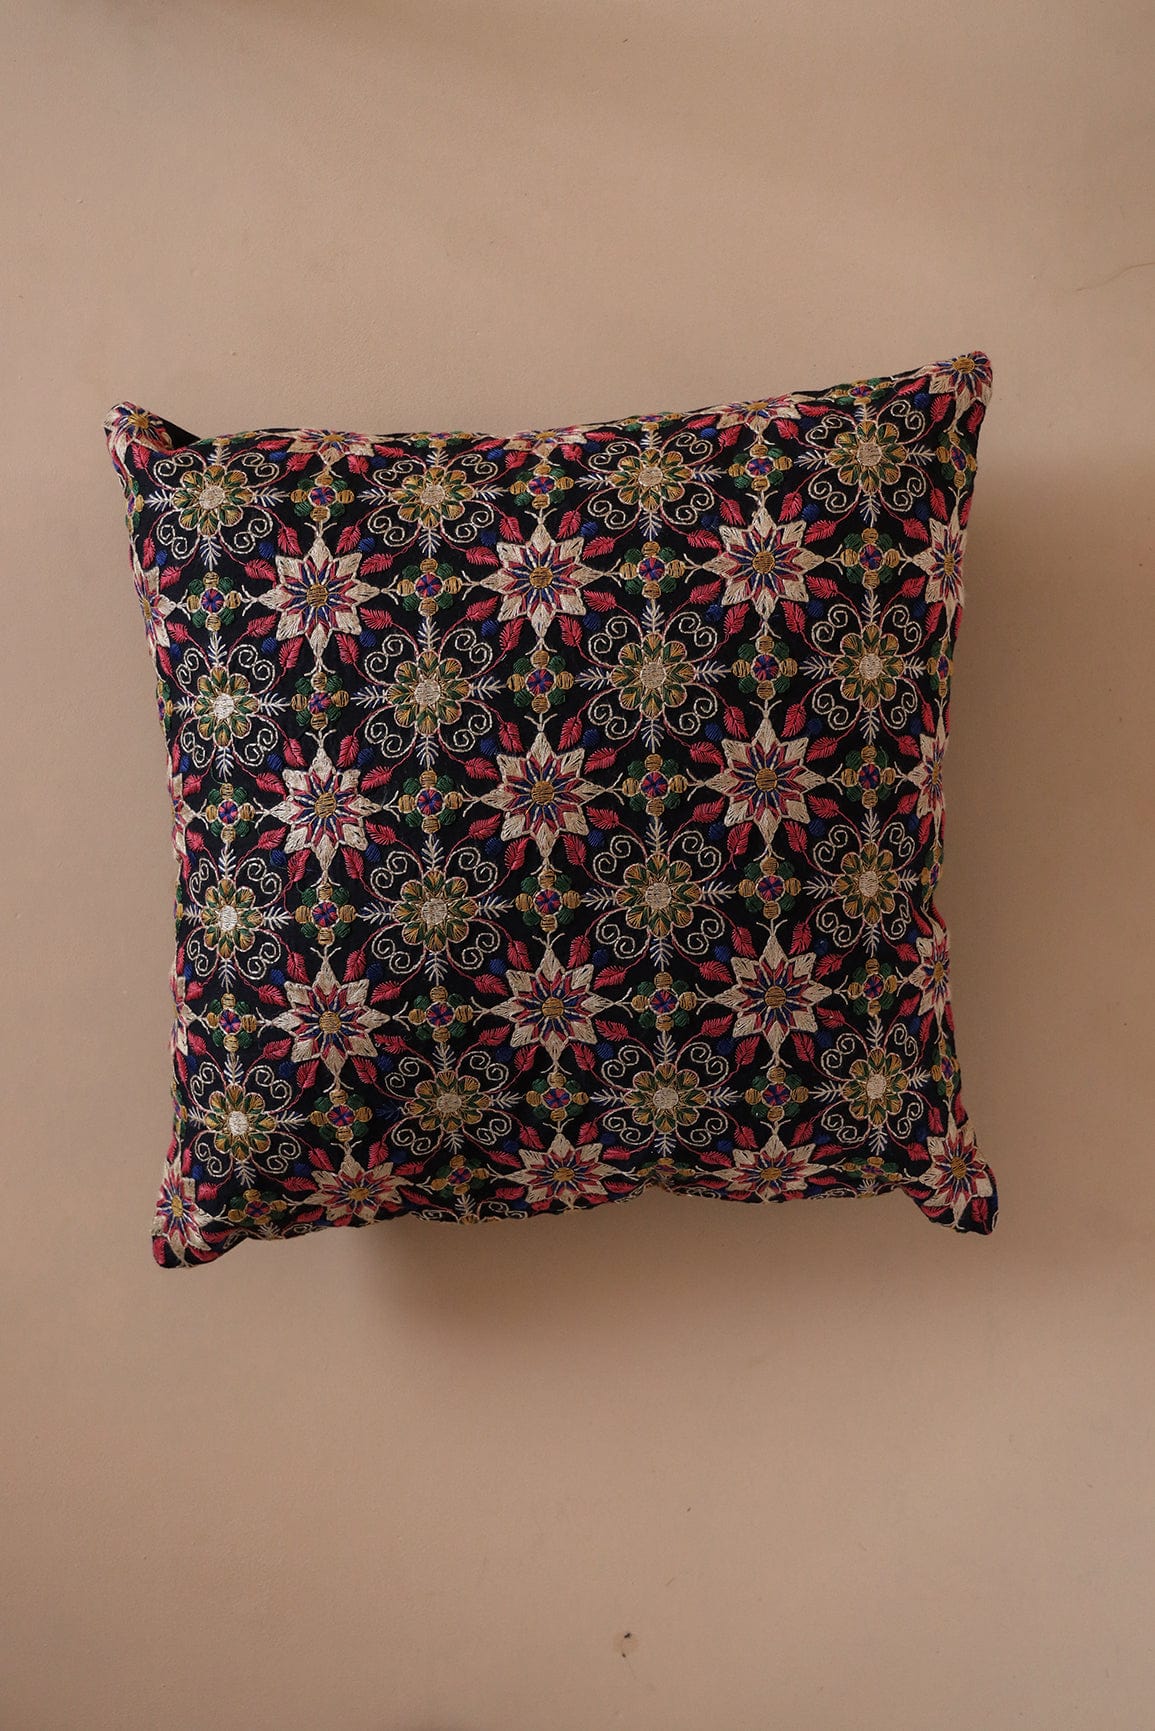 doeraa Elegant Floral Embroidery on Black cotton Cushion Cover (16*16 inches)